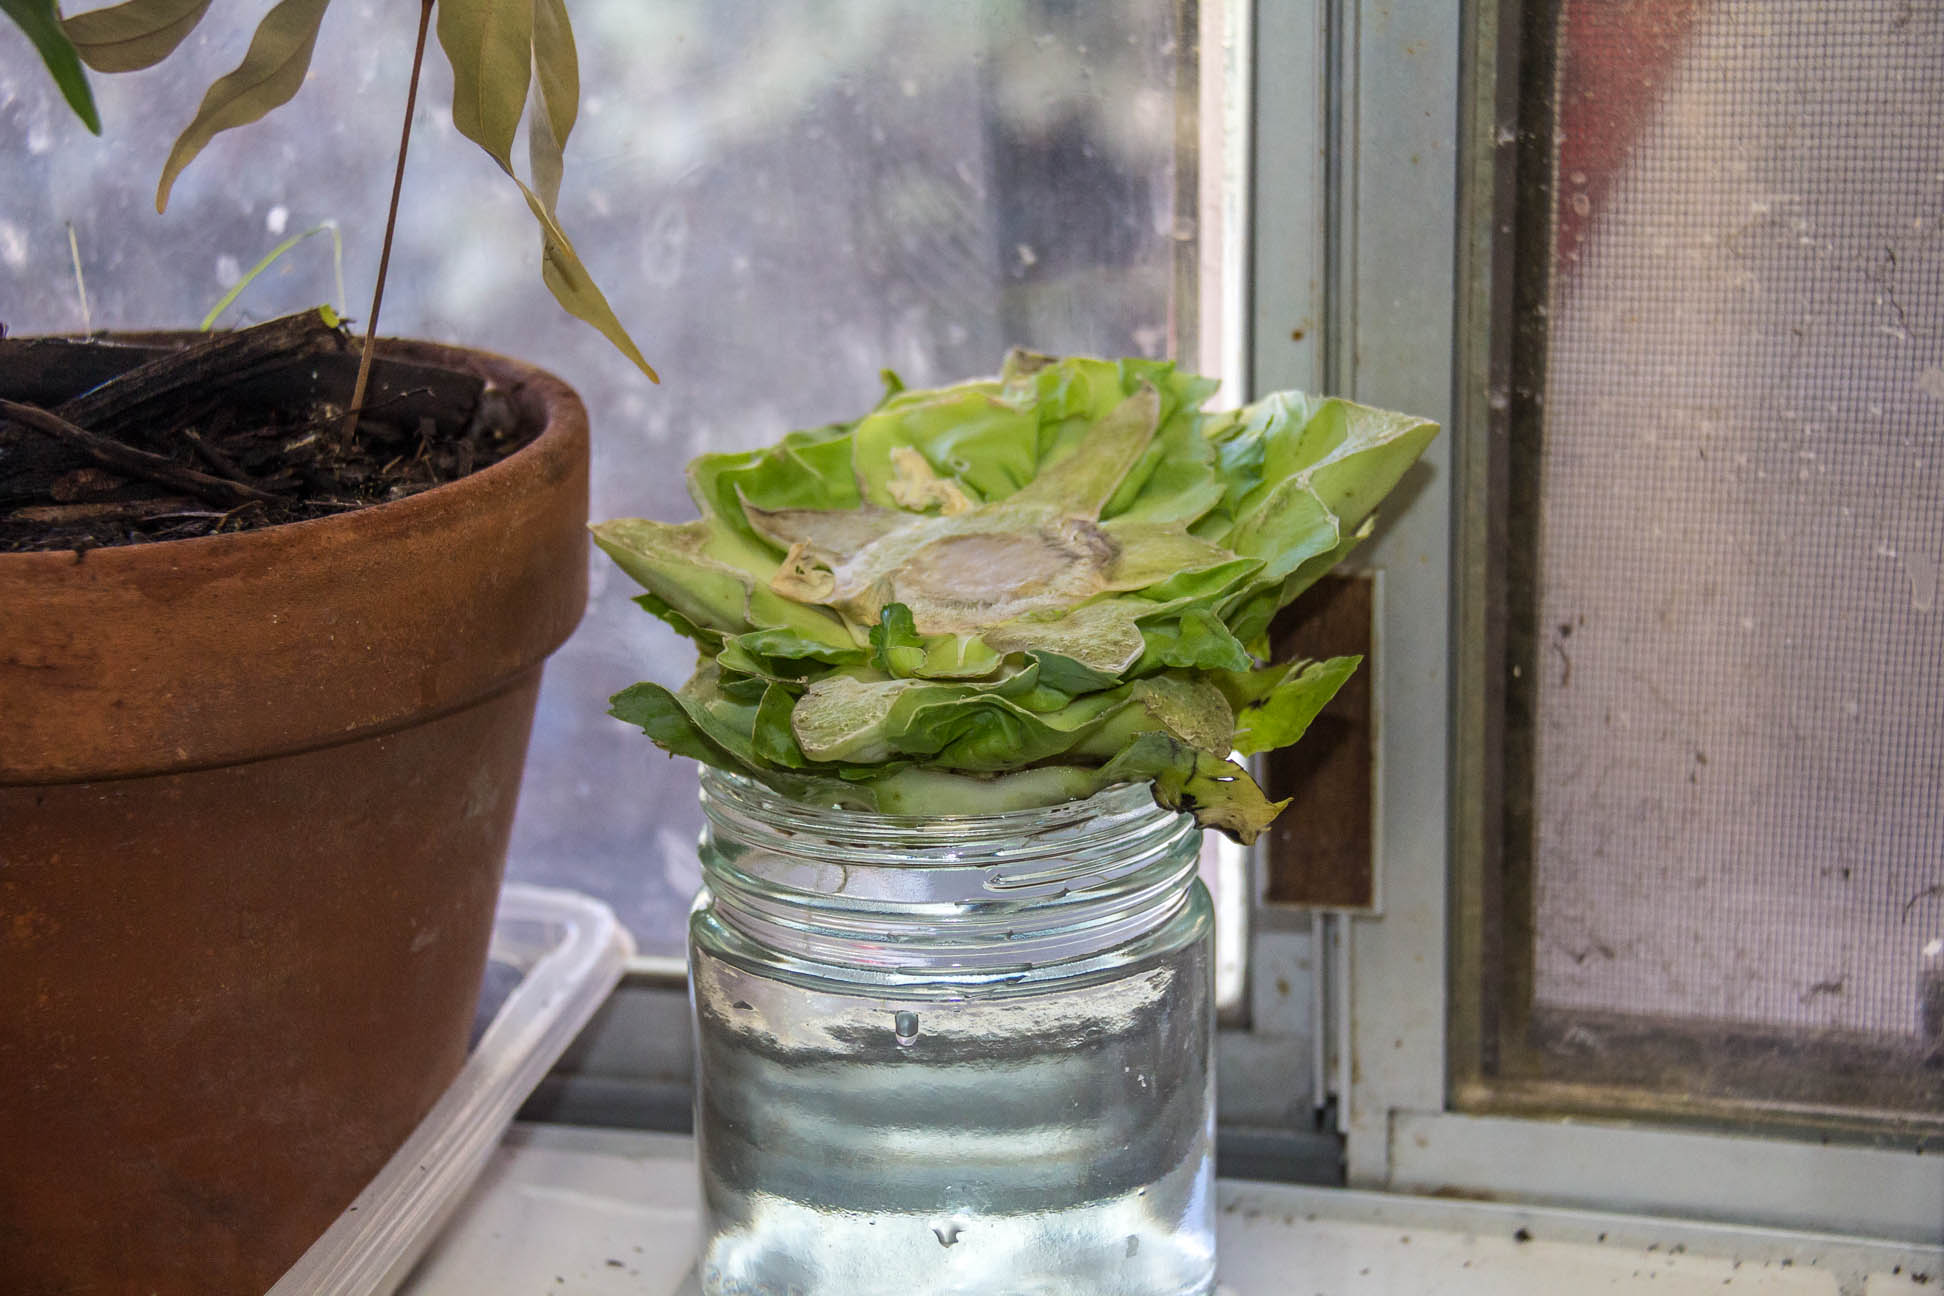 23/04/15 Day 9: Changed to a jar of water so as to not to squash the roots. more foliage is visible.